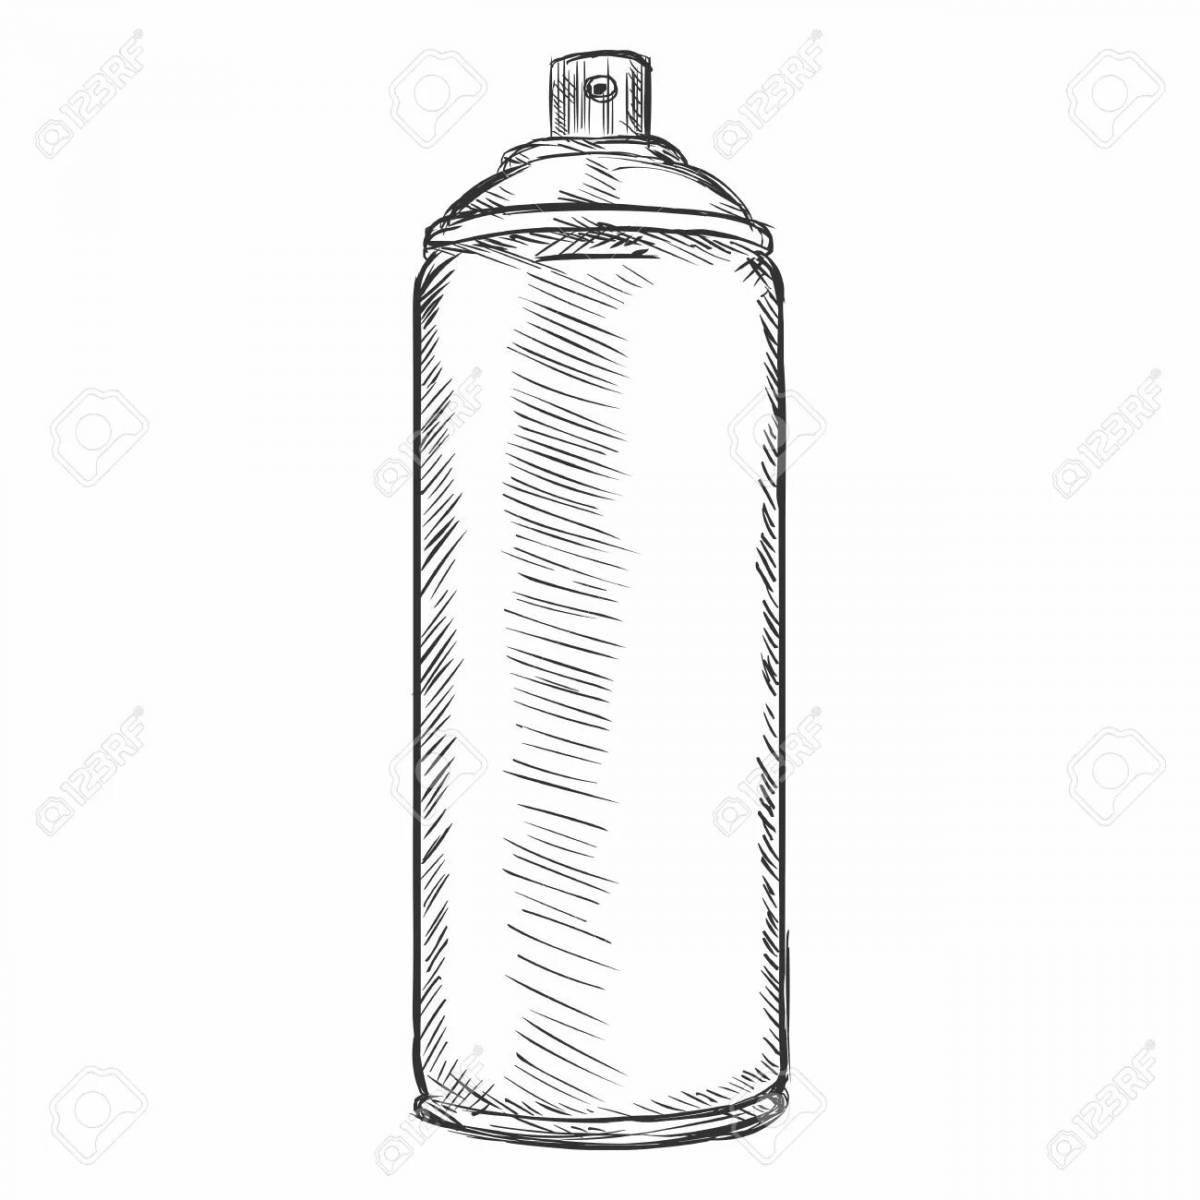 Coloring page elegant gas cylinders